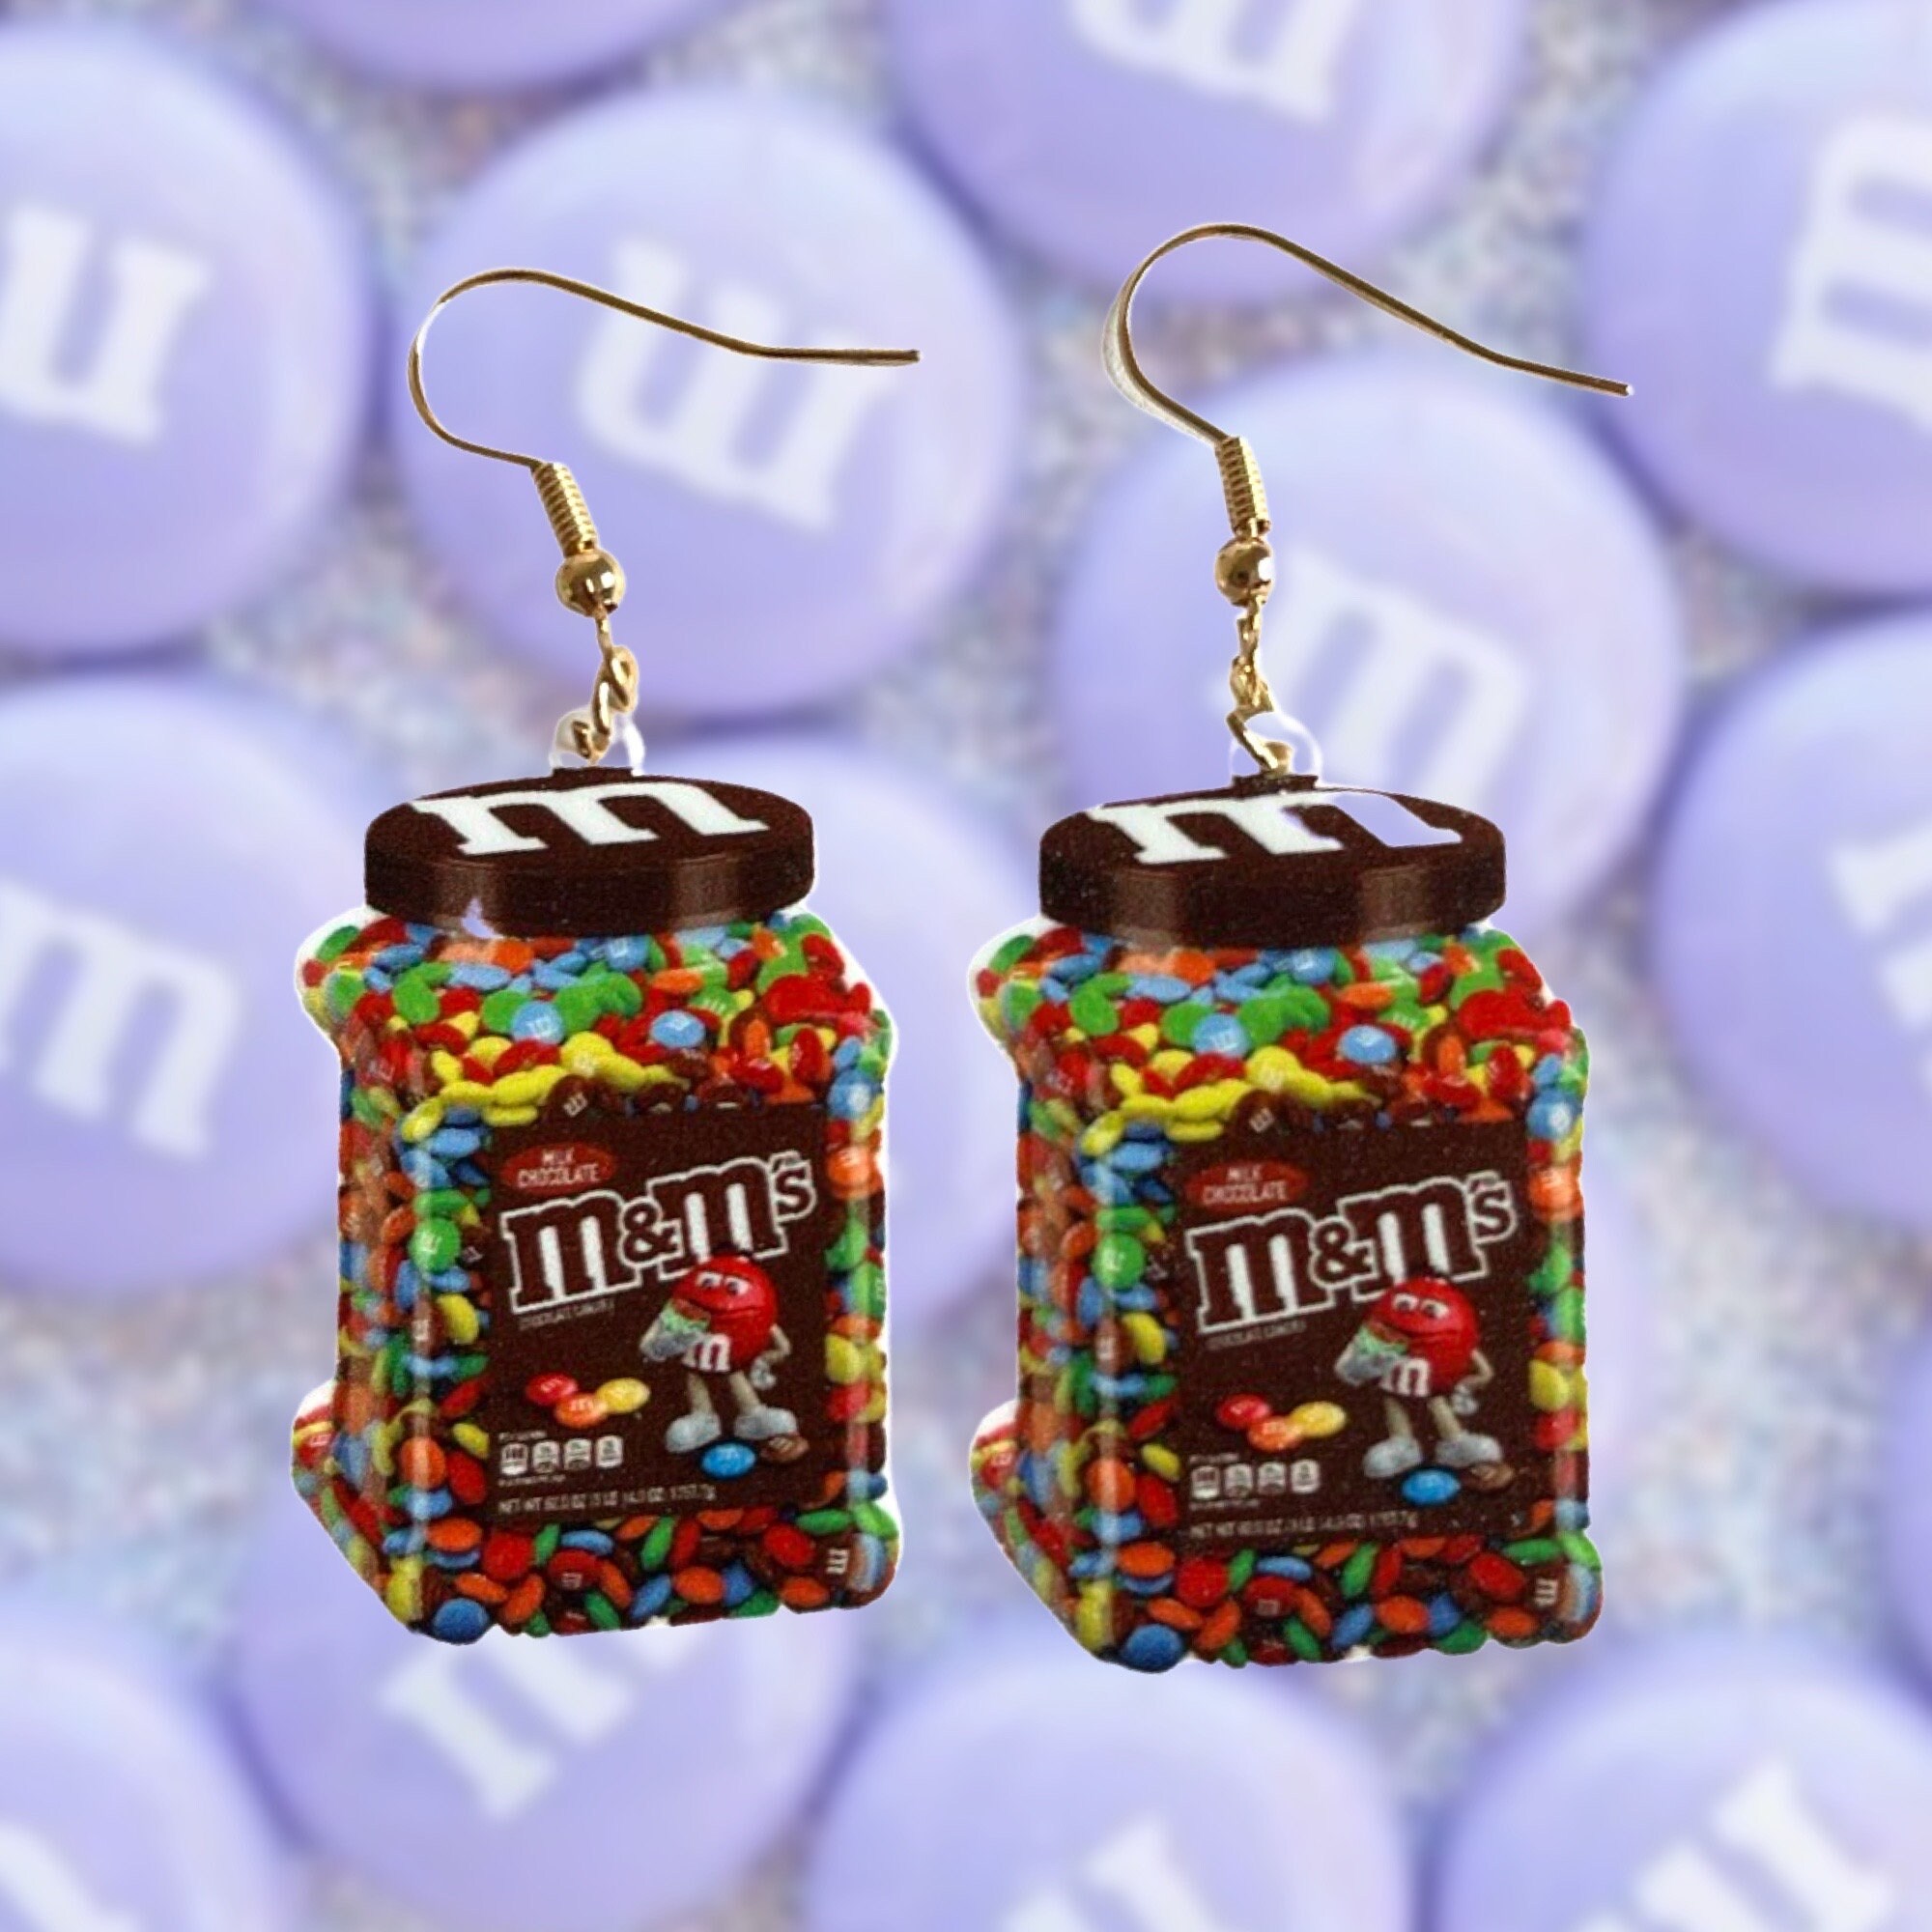 M&M's World Caramel Candy Bag Resin Christmas Ornament New with Tag